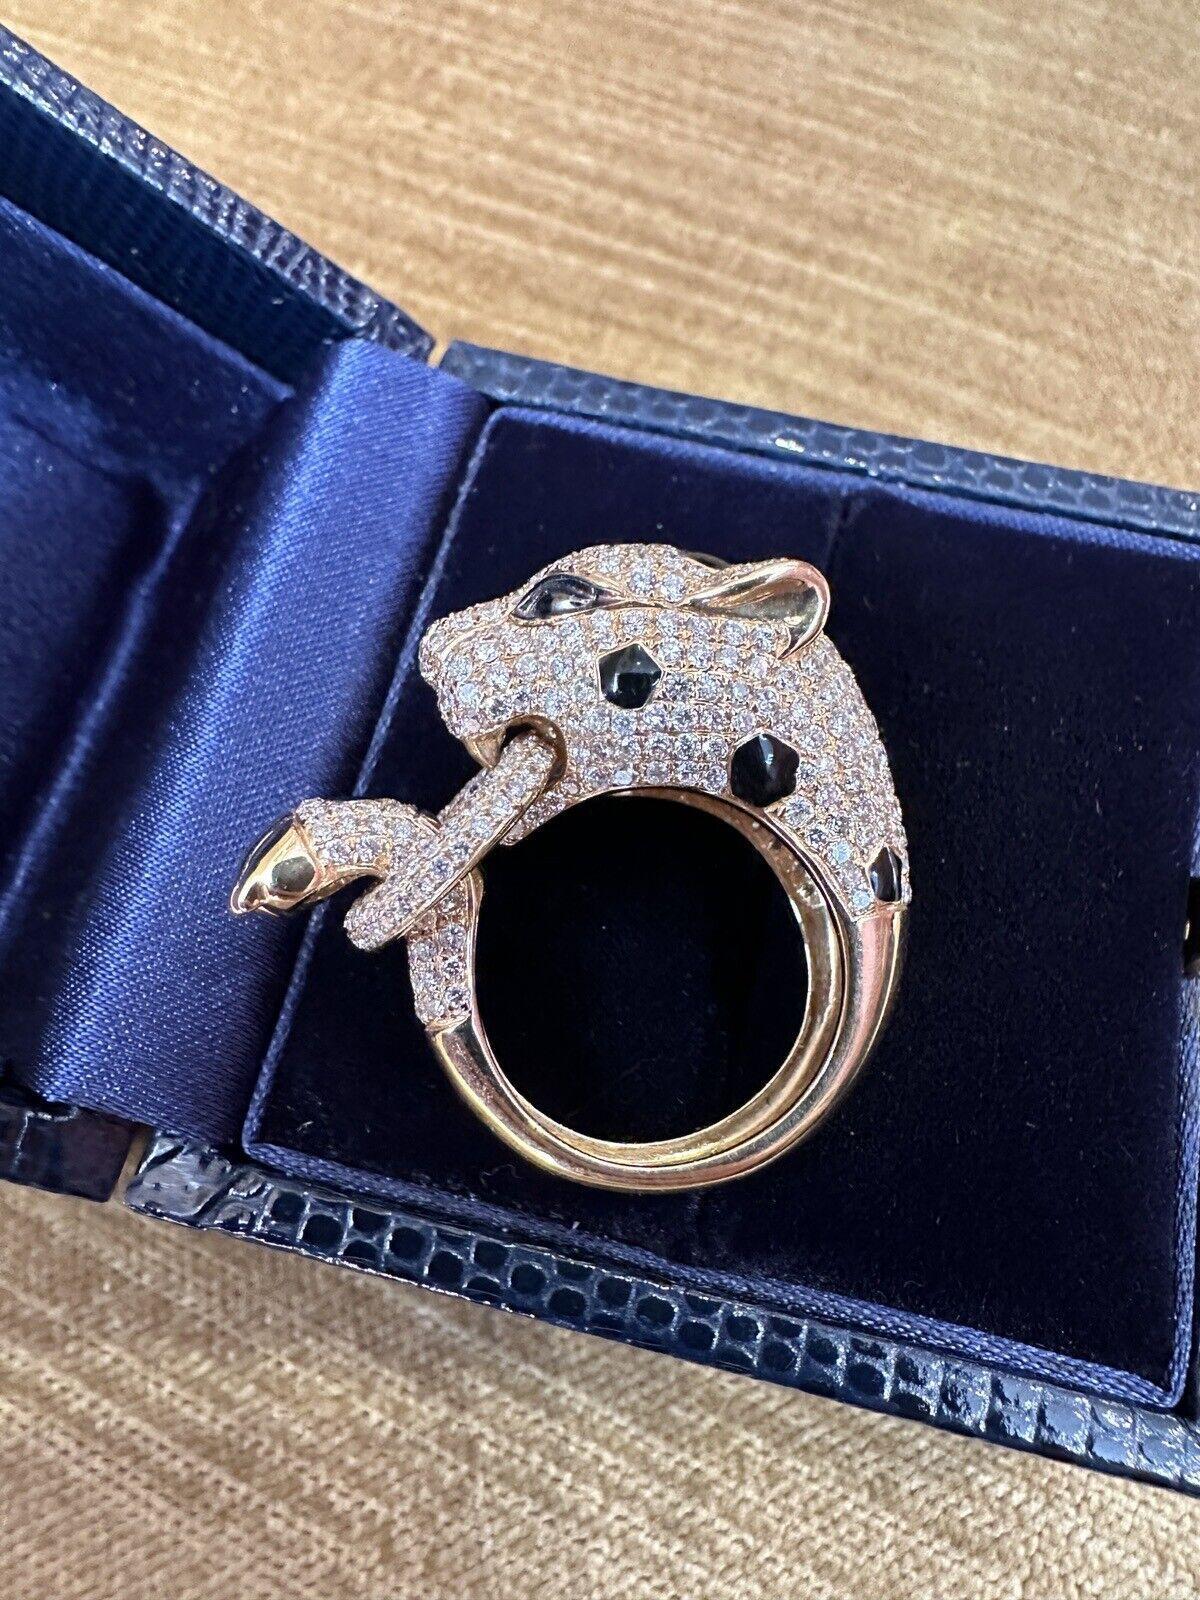 Diamond Pavé Panther Ring 3.51 carat total weight in 18k Yellow Gold 

Panther Ring features a Spotted Panther design decorated with 3.51 carats of Round Brilliant Diamonds and black enamel spots, with a Pavé set Diamond Link in the mouth and paw,